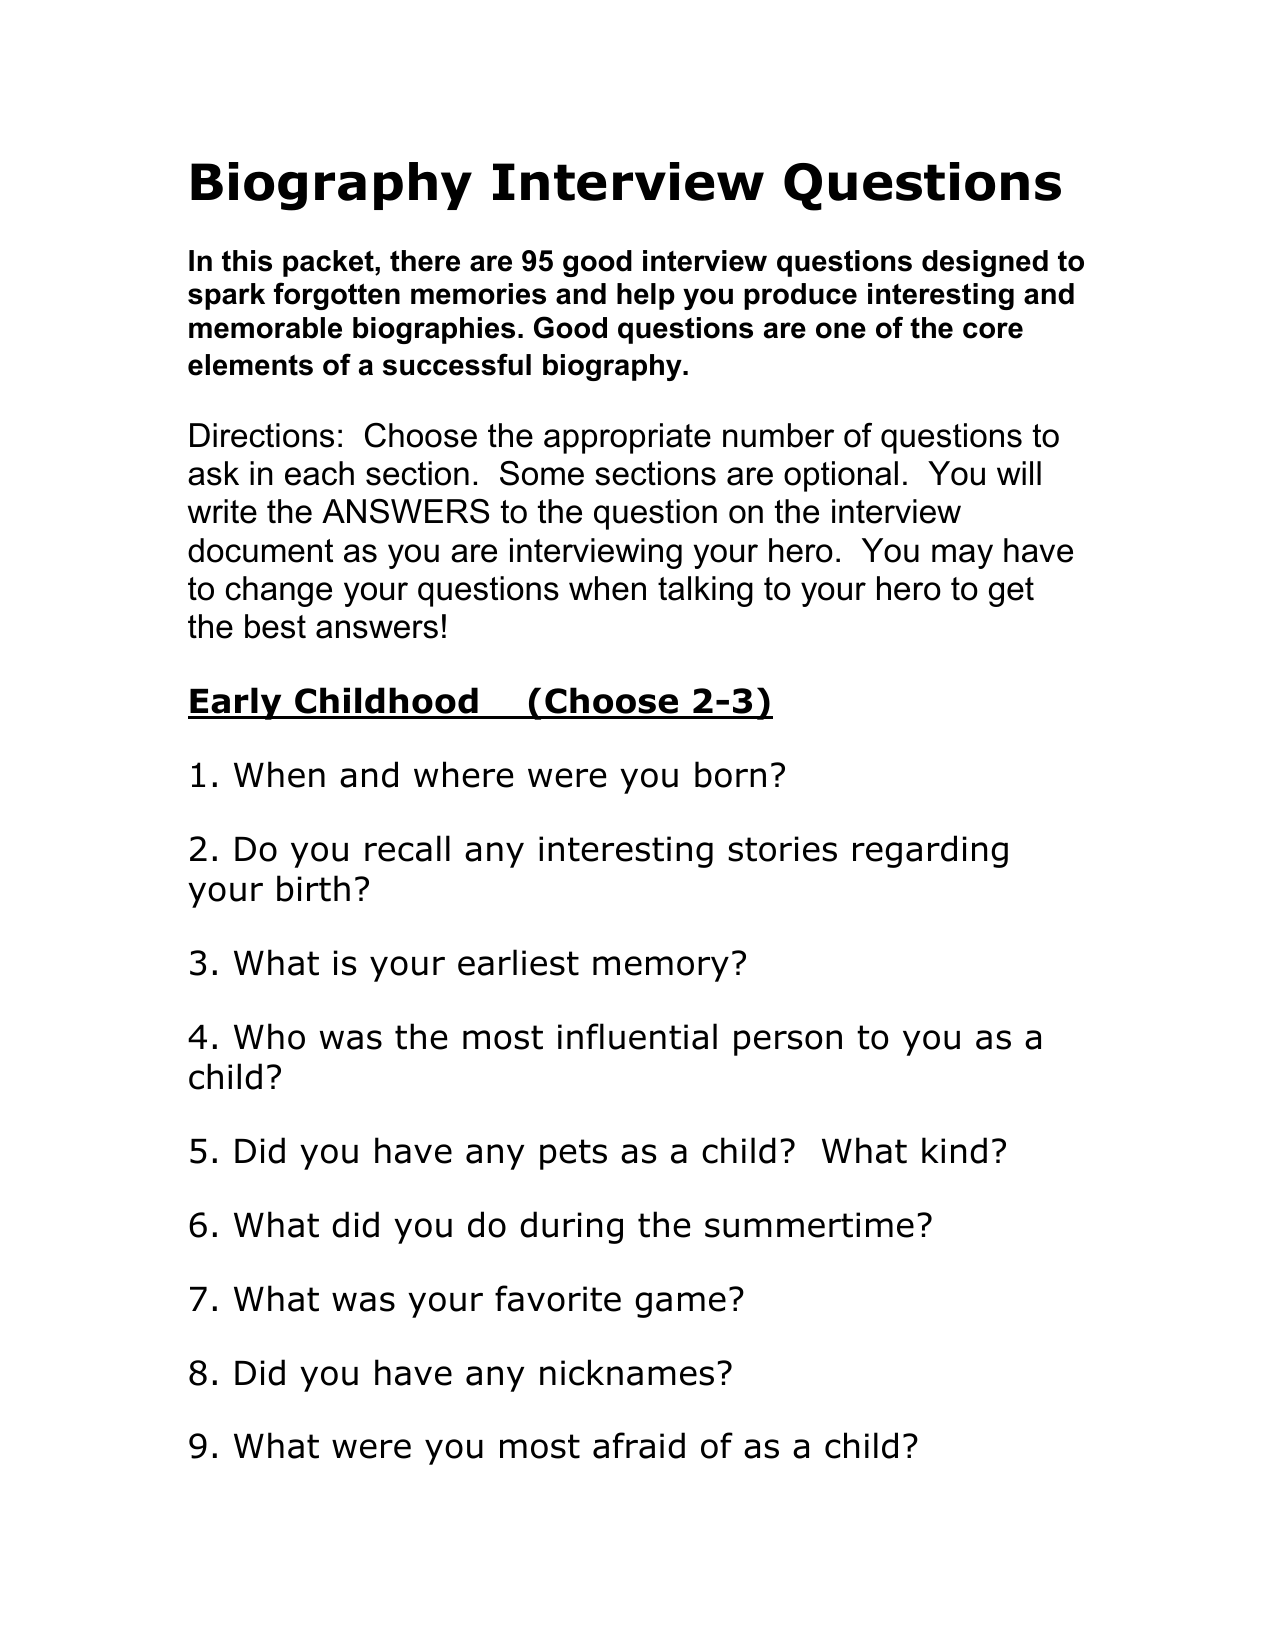 Questions to ask someone to write a biography - Questions to ask